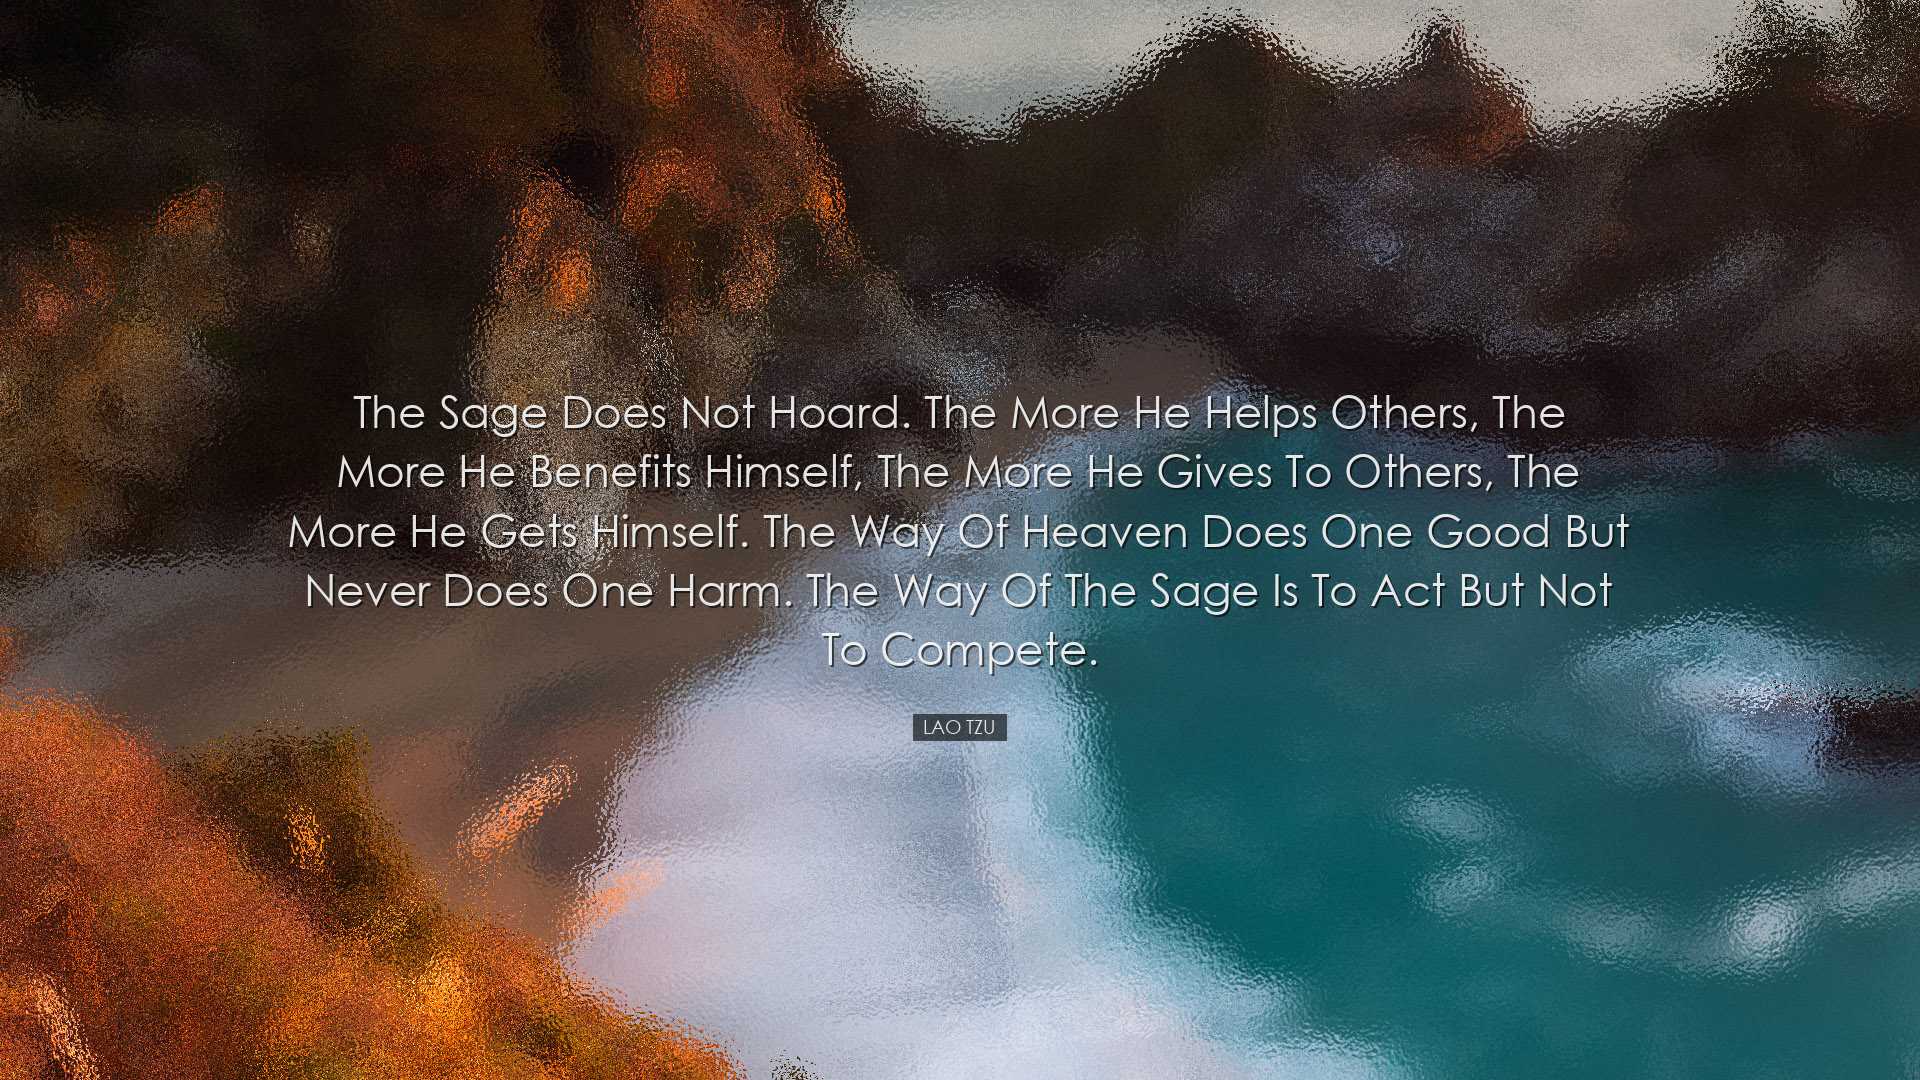 The sage does not hoard. The more he helps others, the more he ben